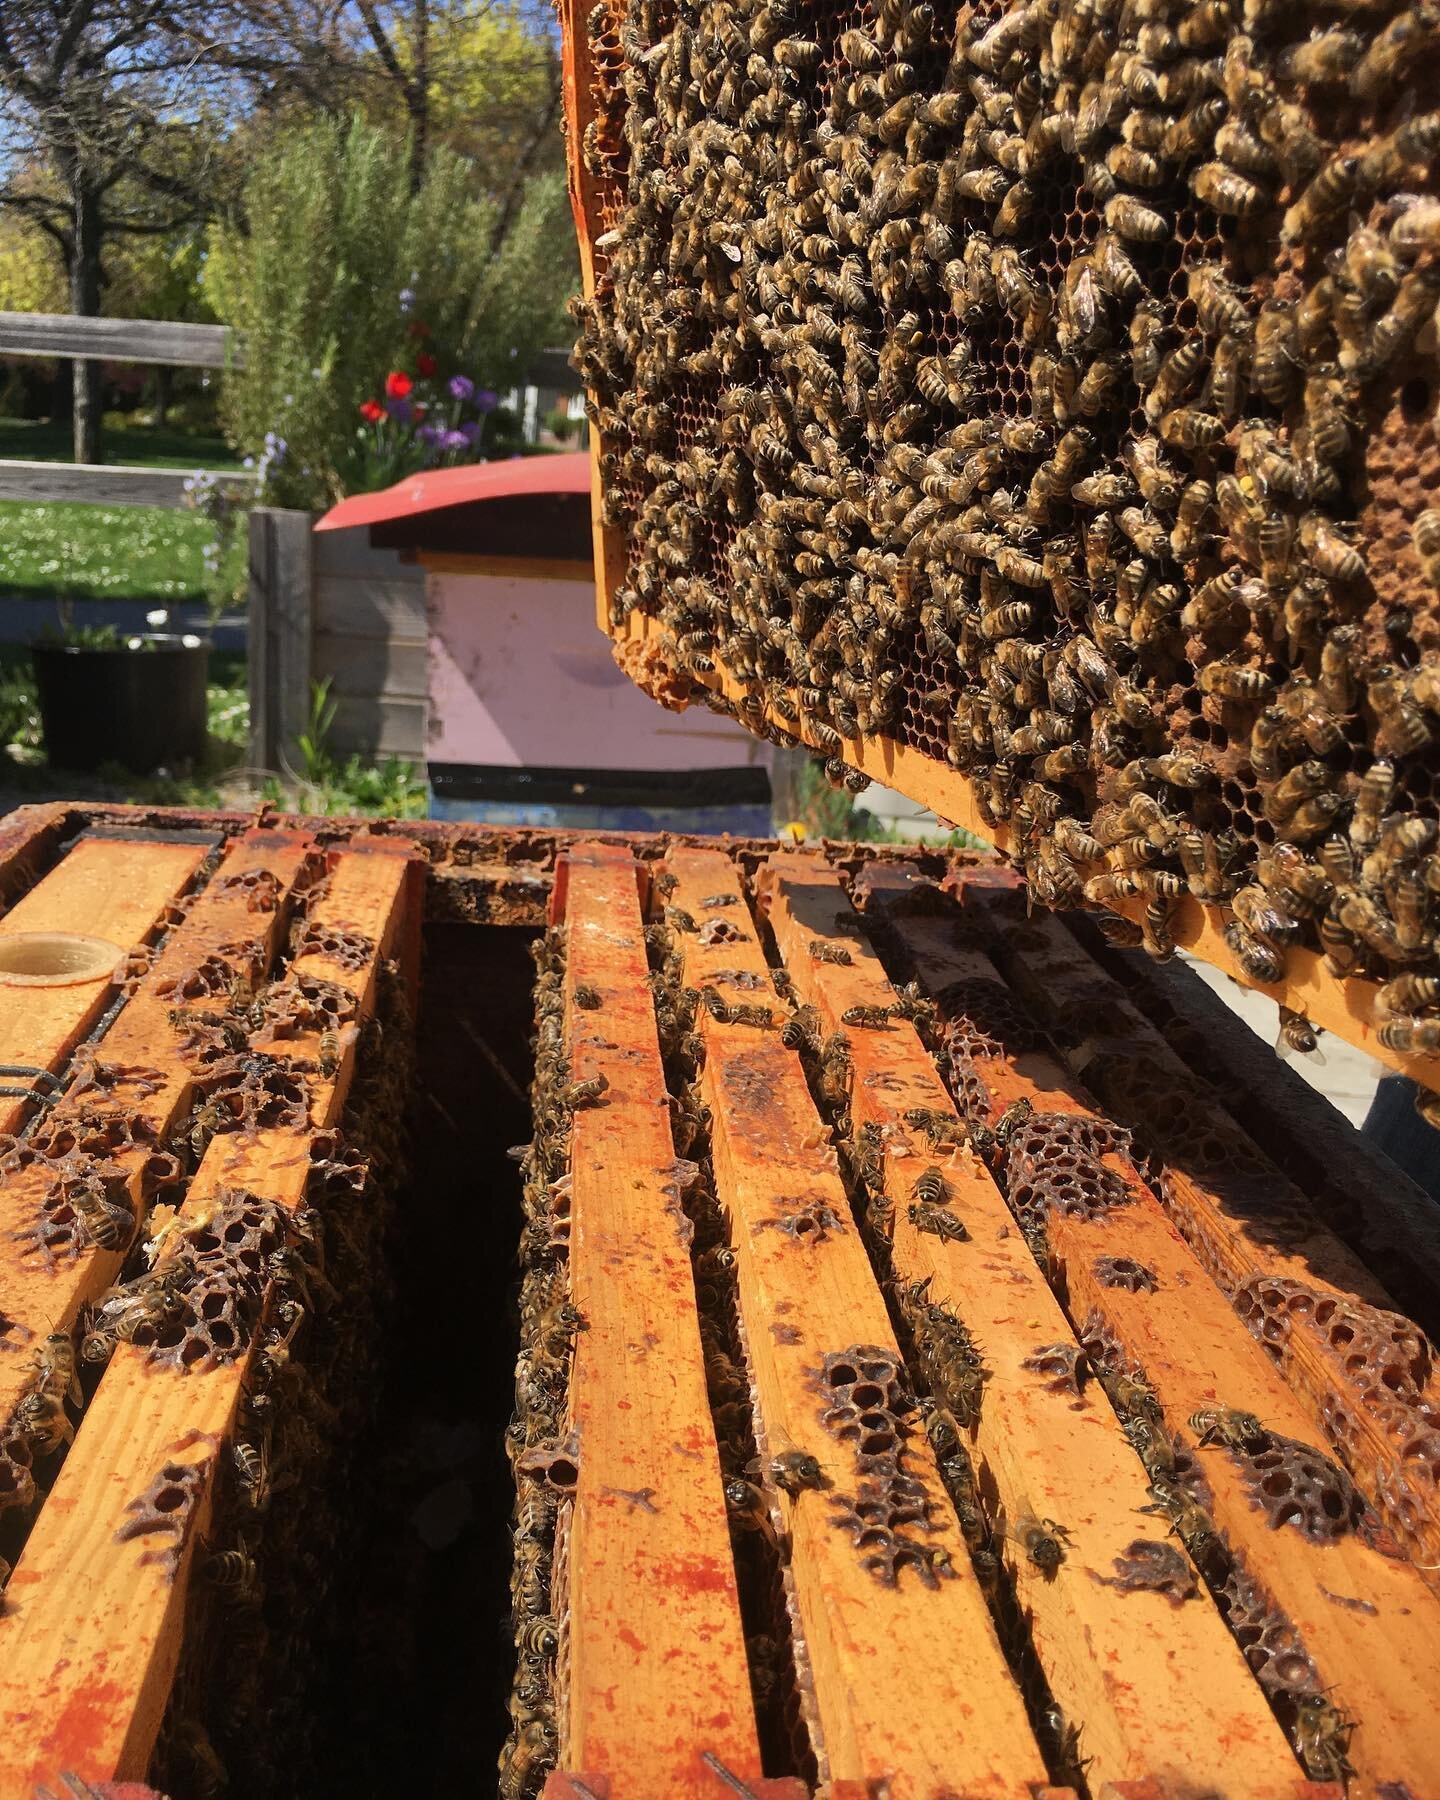 Beginning with bees. Cultivating wisdom in the constitution of the bee commune. #hiveculture #psychic #apiary #requeening #beekeeping #honeycomb